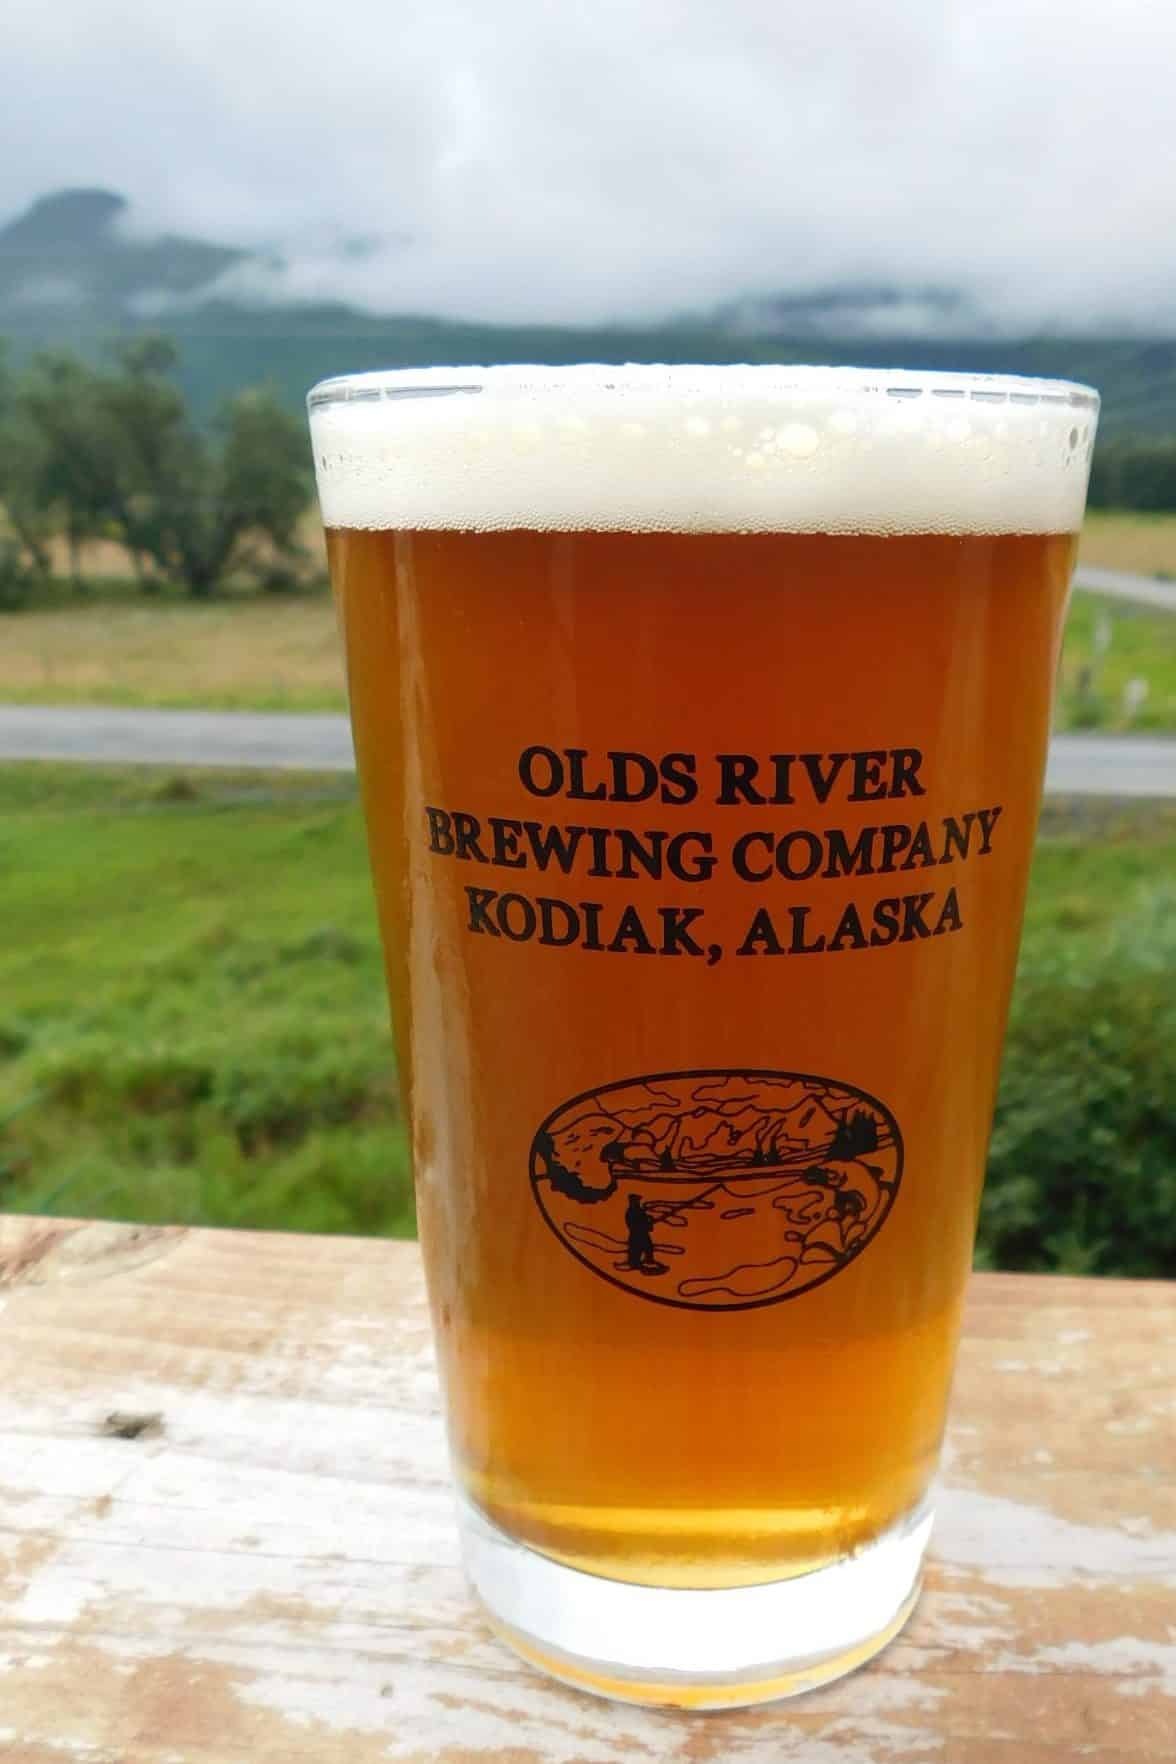 Olds River Brewing Company